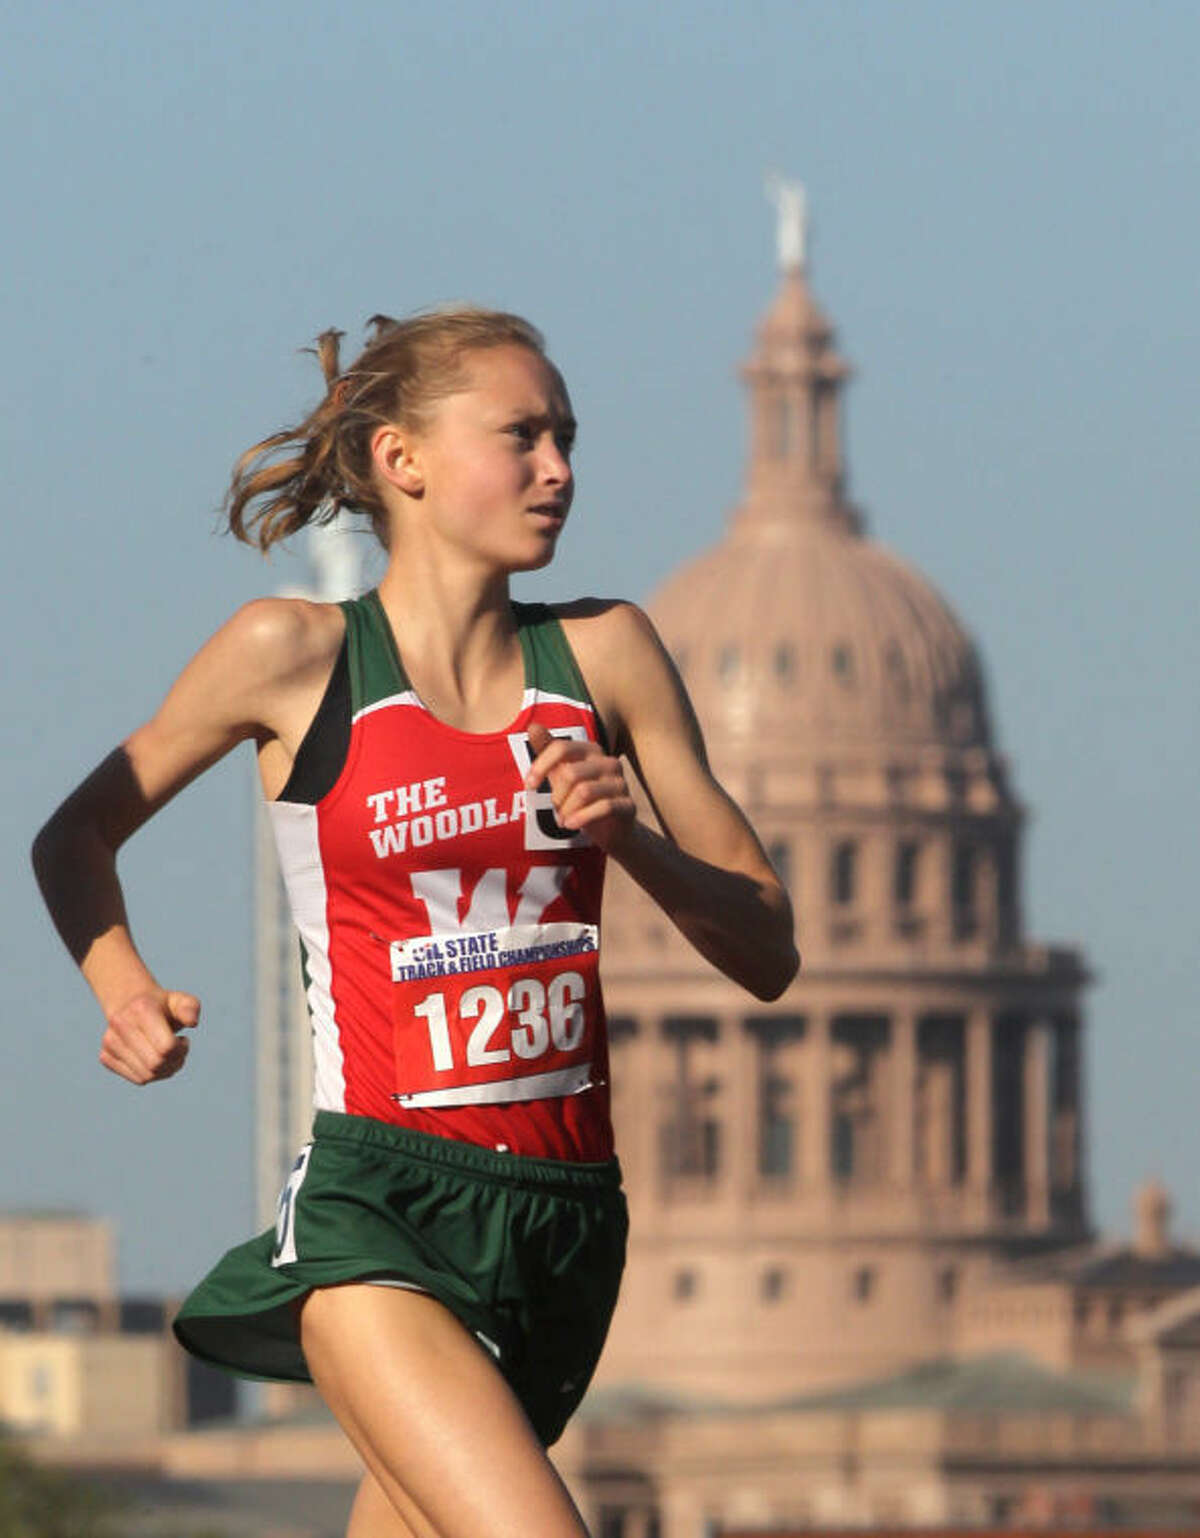 The Woodlands' Kara Zuspan competes in the Class 5A girls 3,200-meter run during the UIL State Track and Field Championships at Mike A. Myers Stadium in Austin Saturday. To view or purchase this photo and others like it, visit HCNpics.com.